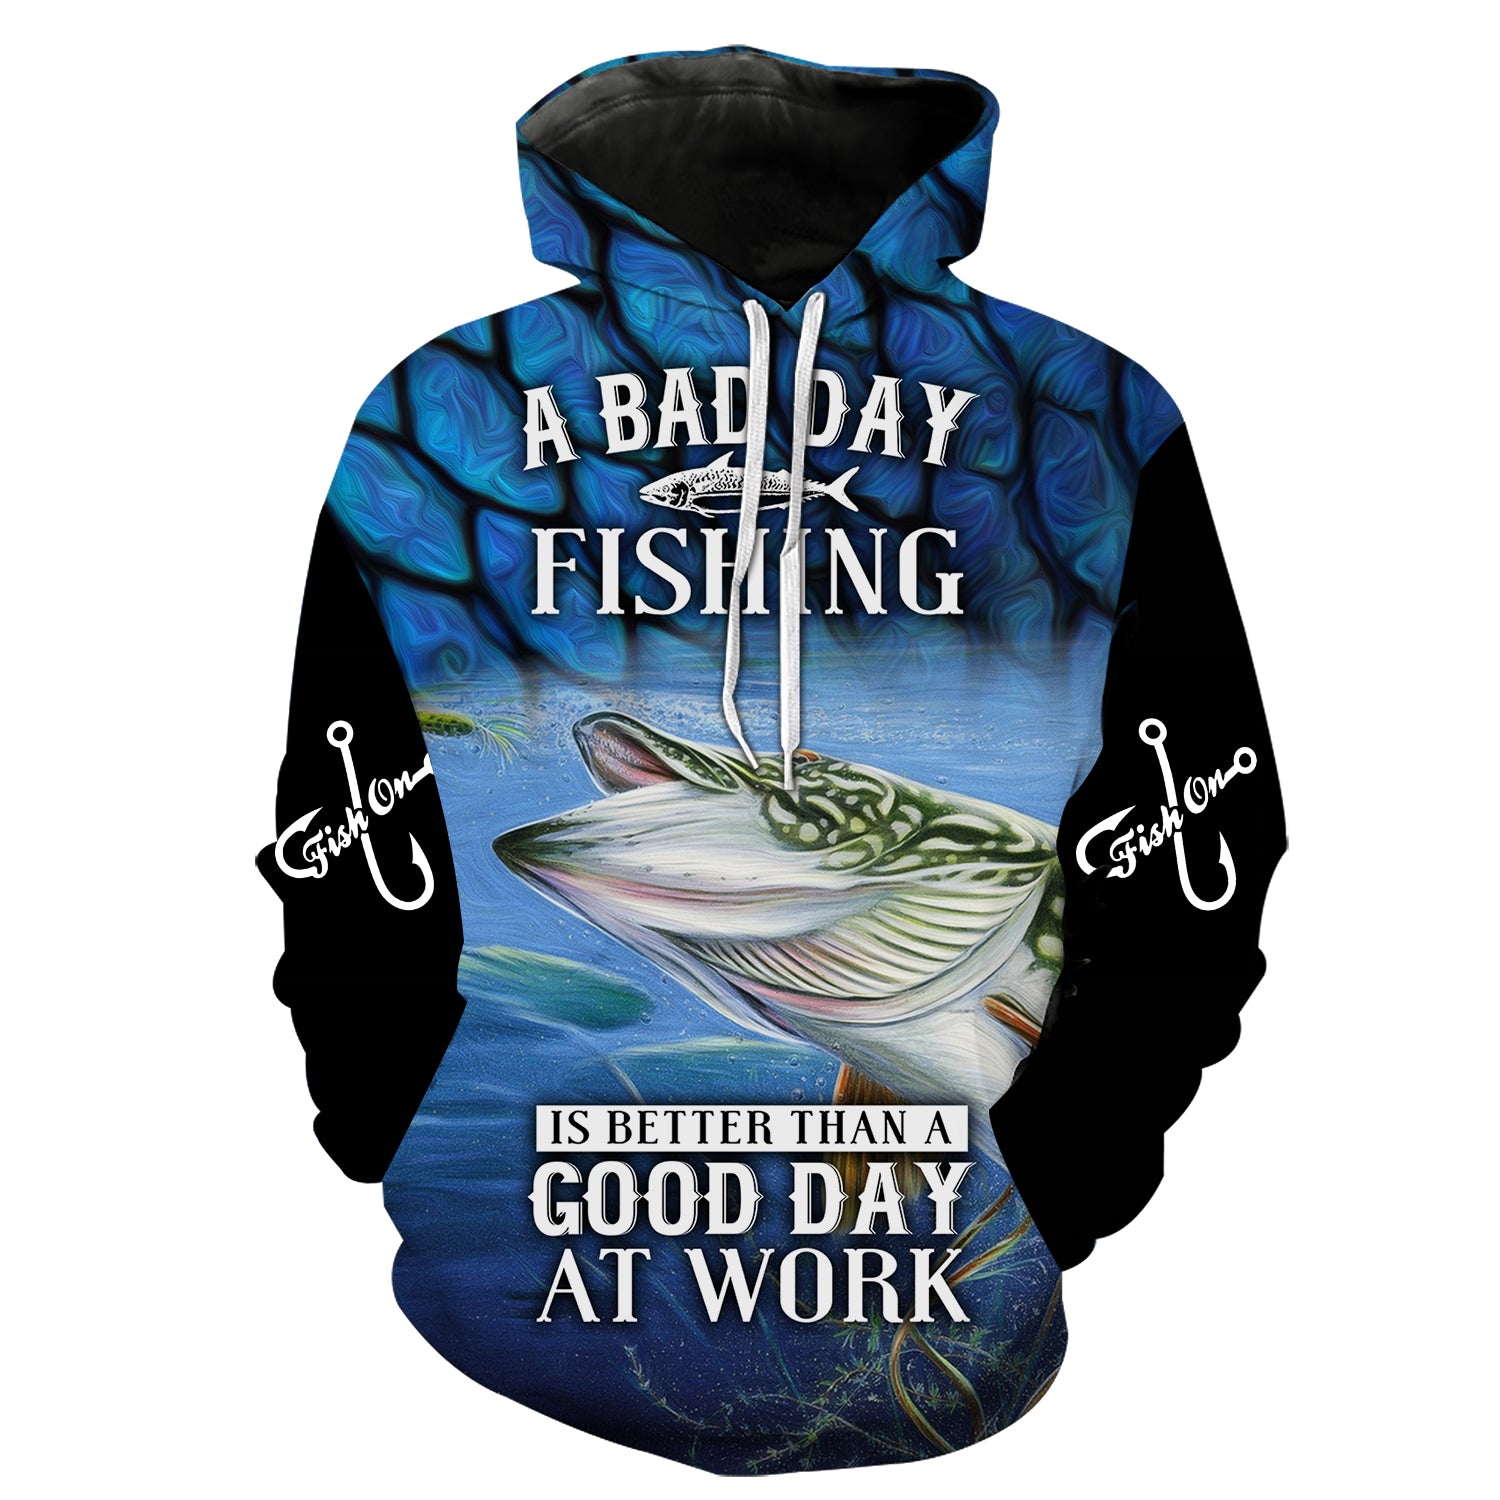 Fishing Better than work - Blue Scales Hoodie